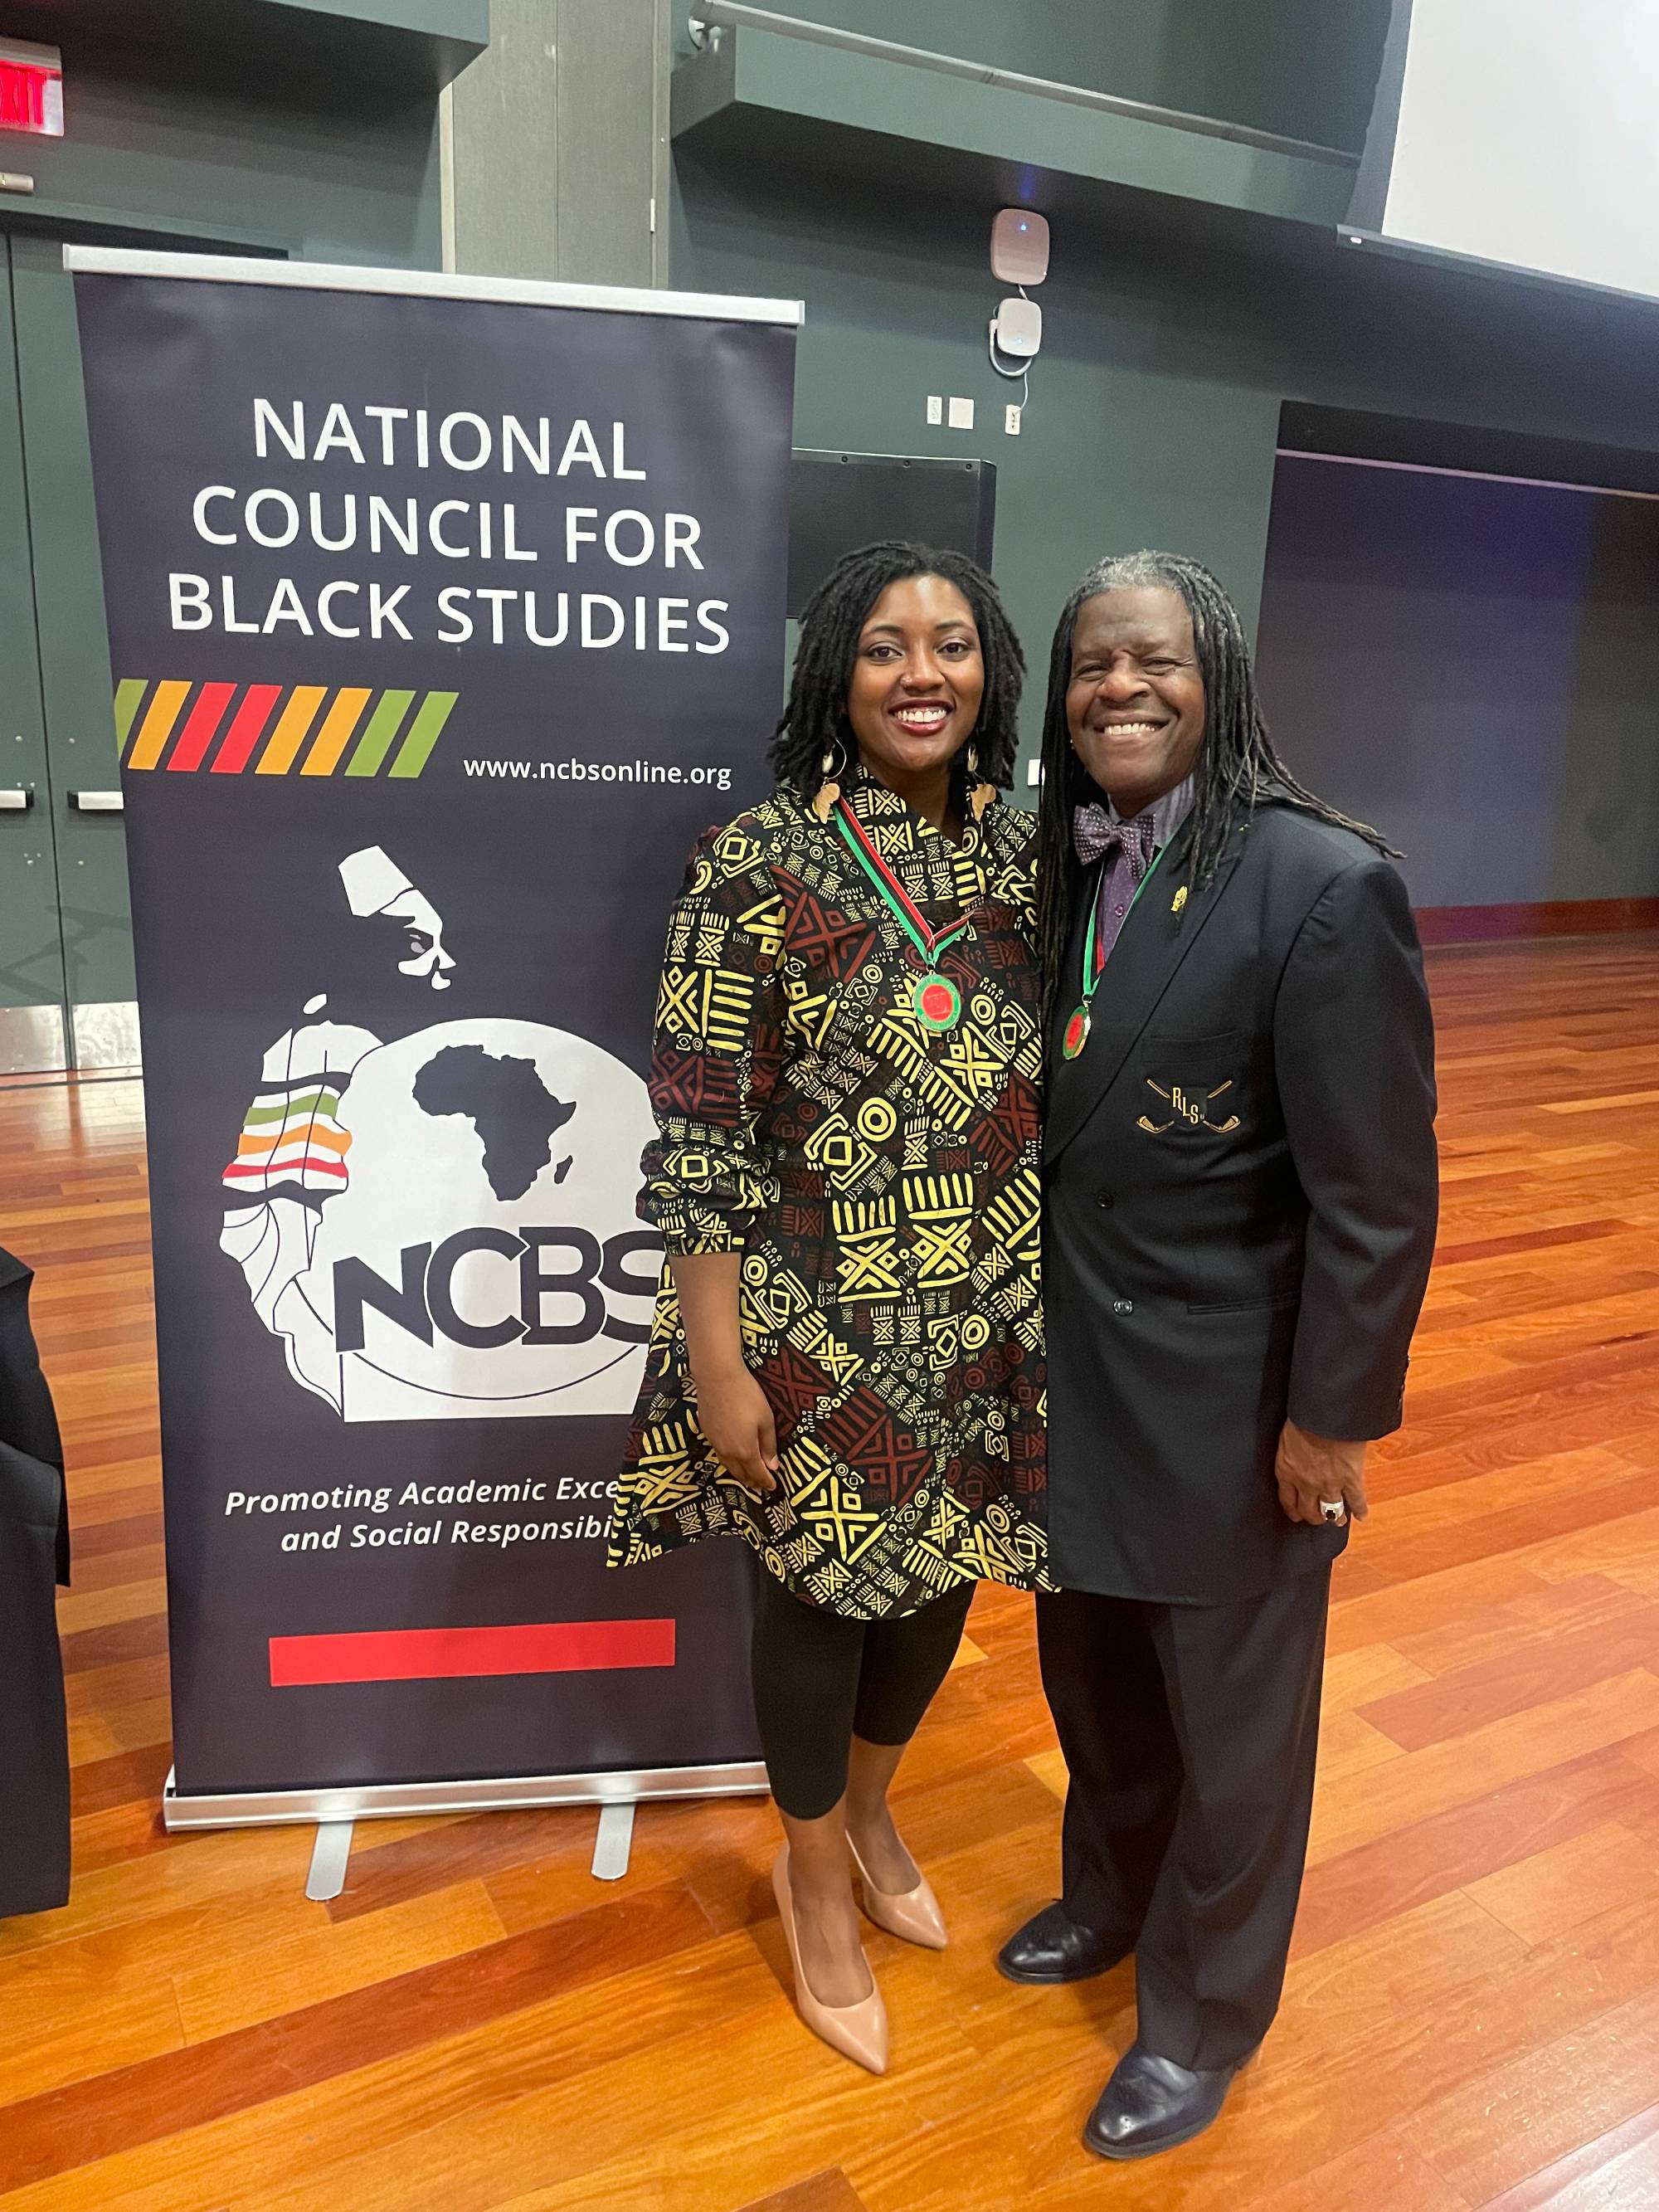 National Council for Black Studies event picture